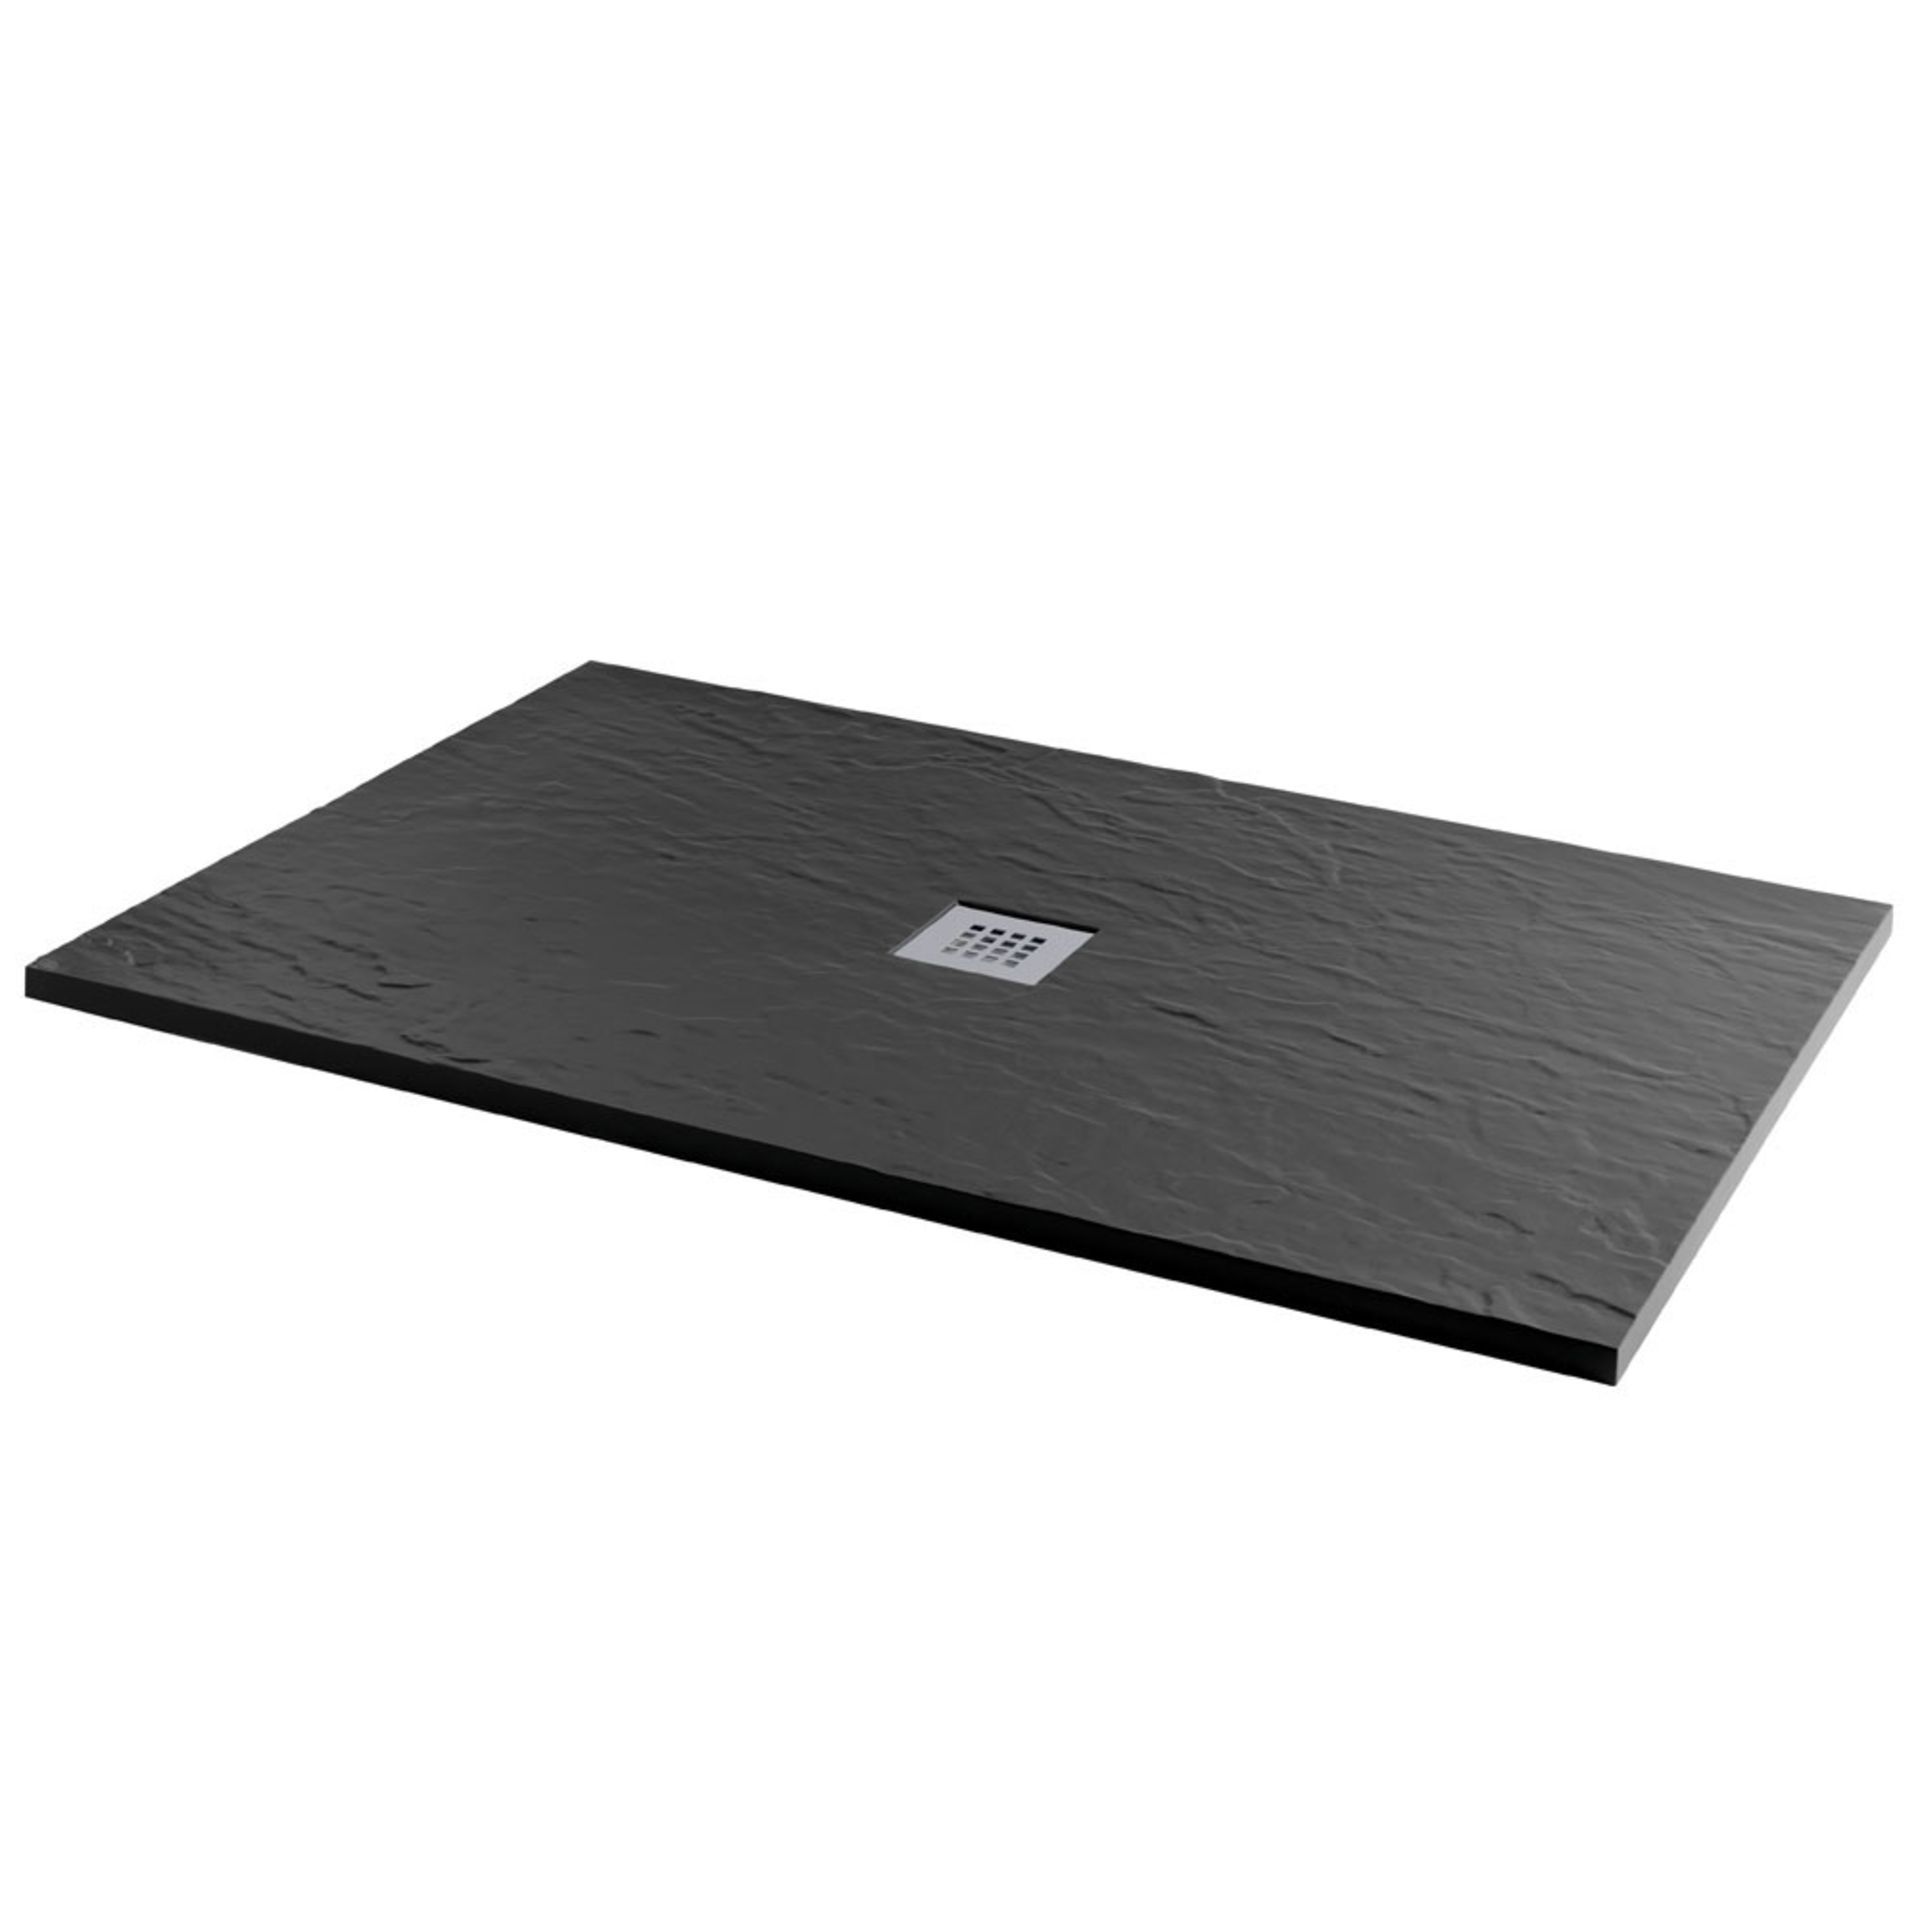 New 1000x800mm Rectangle Black Slate Effect Shower Tray. RRP £549.99.A Textured Black Slate E... - Image 2 of 2